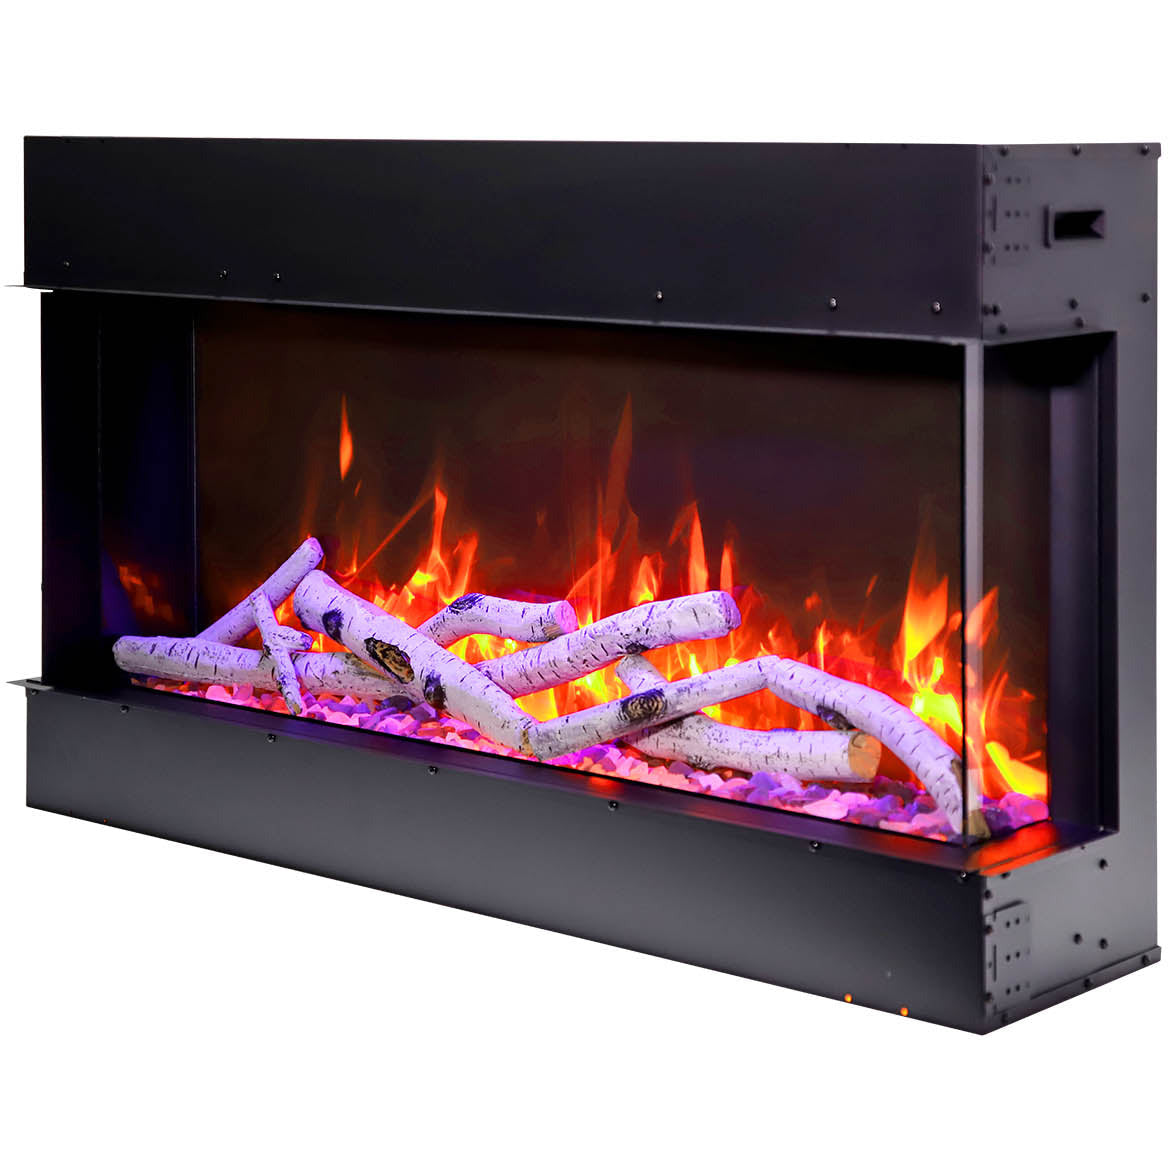 Amantii 60-TRV-SLIM Trv View Slim Smart Electric - 60" Indoor / Outdoor WiFi Enabled 3 Sided Fireplace Featuring a depth of 10 5/8", MultiFunction Remote Control, Multi Speed Flame Motor, and a 10 piece Birch Log Set